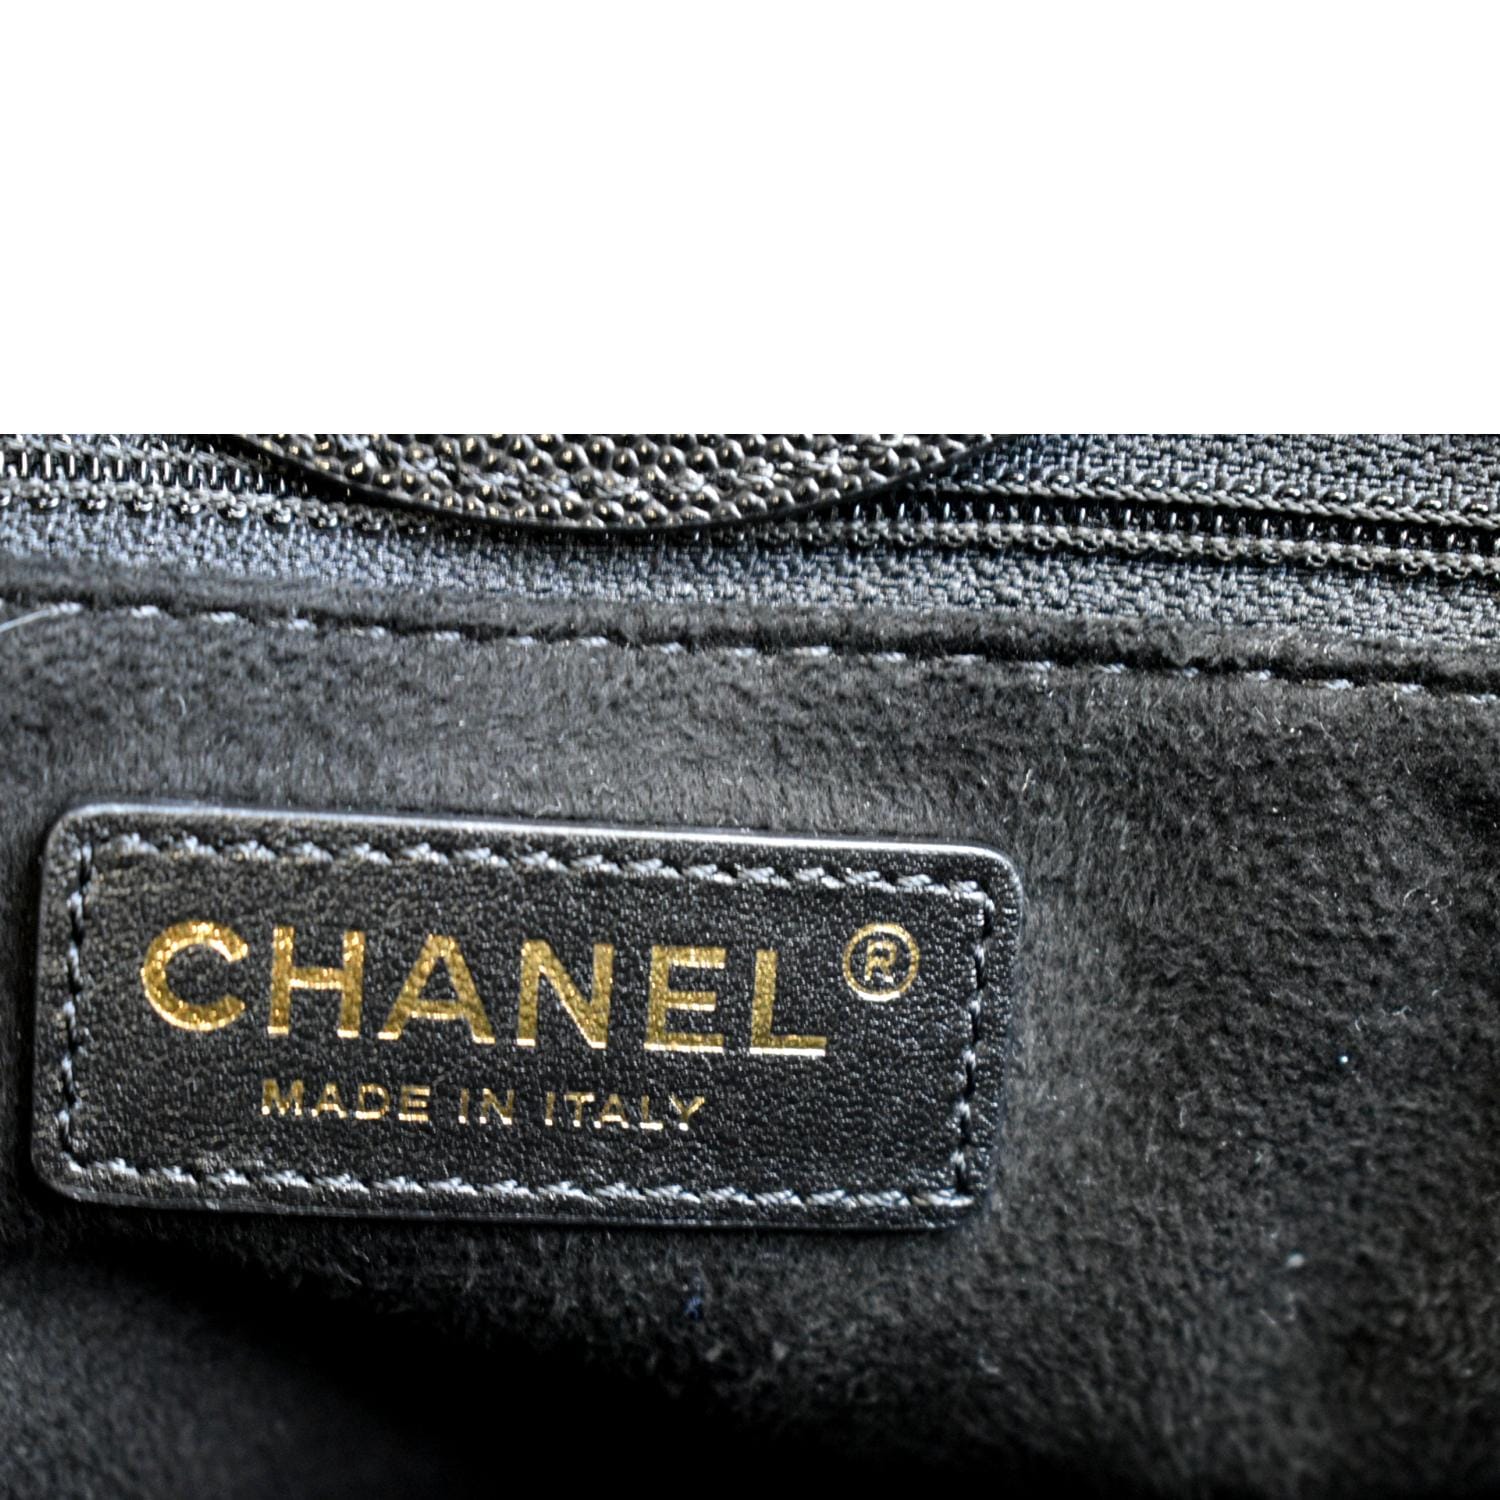 Pre-owned Chanel Deauville Leather Tote In Black